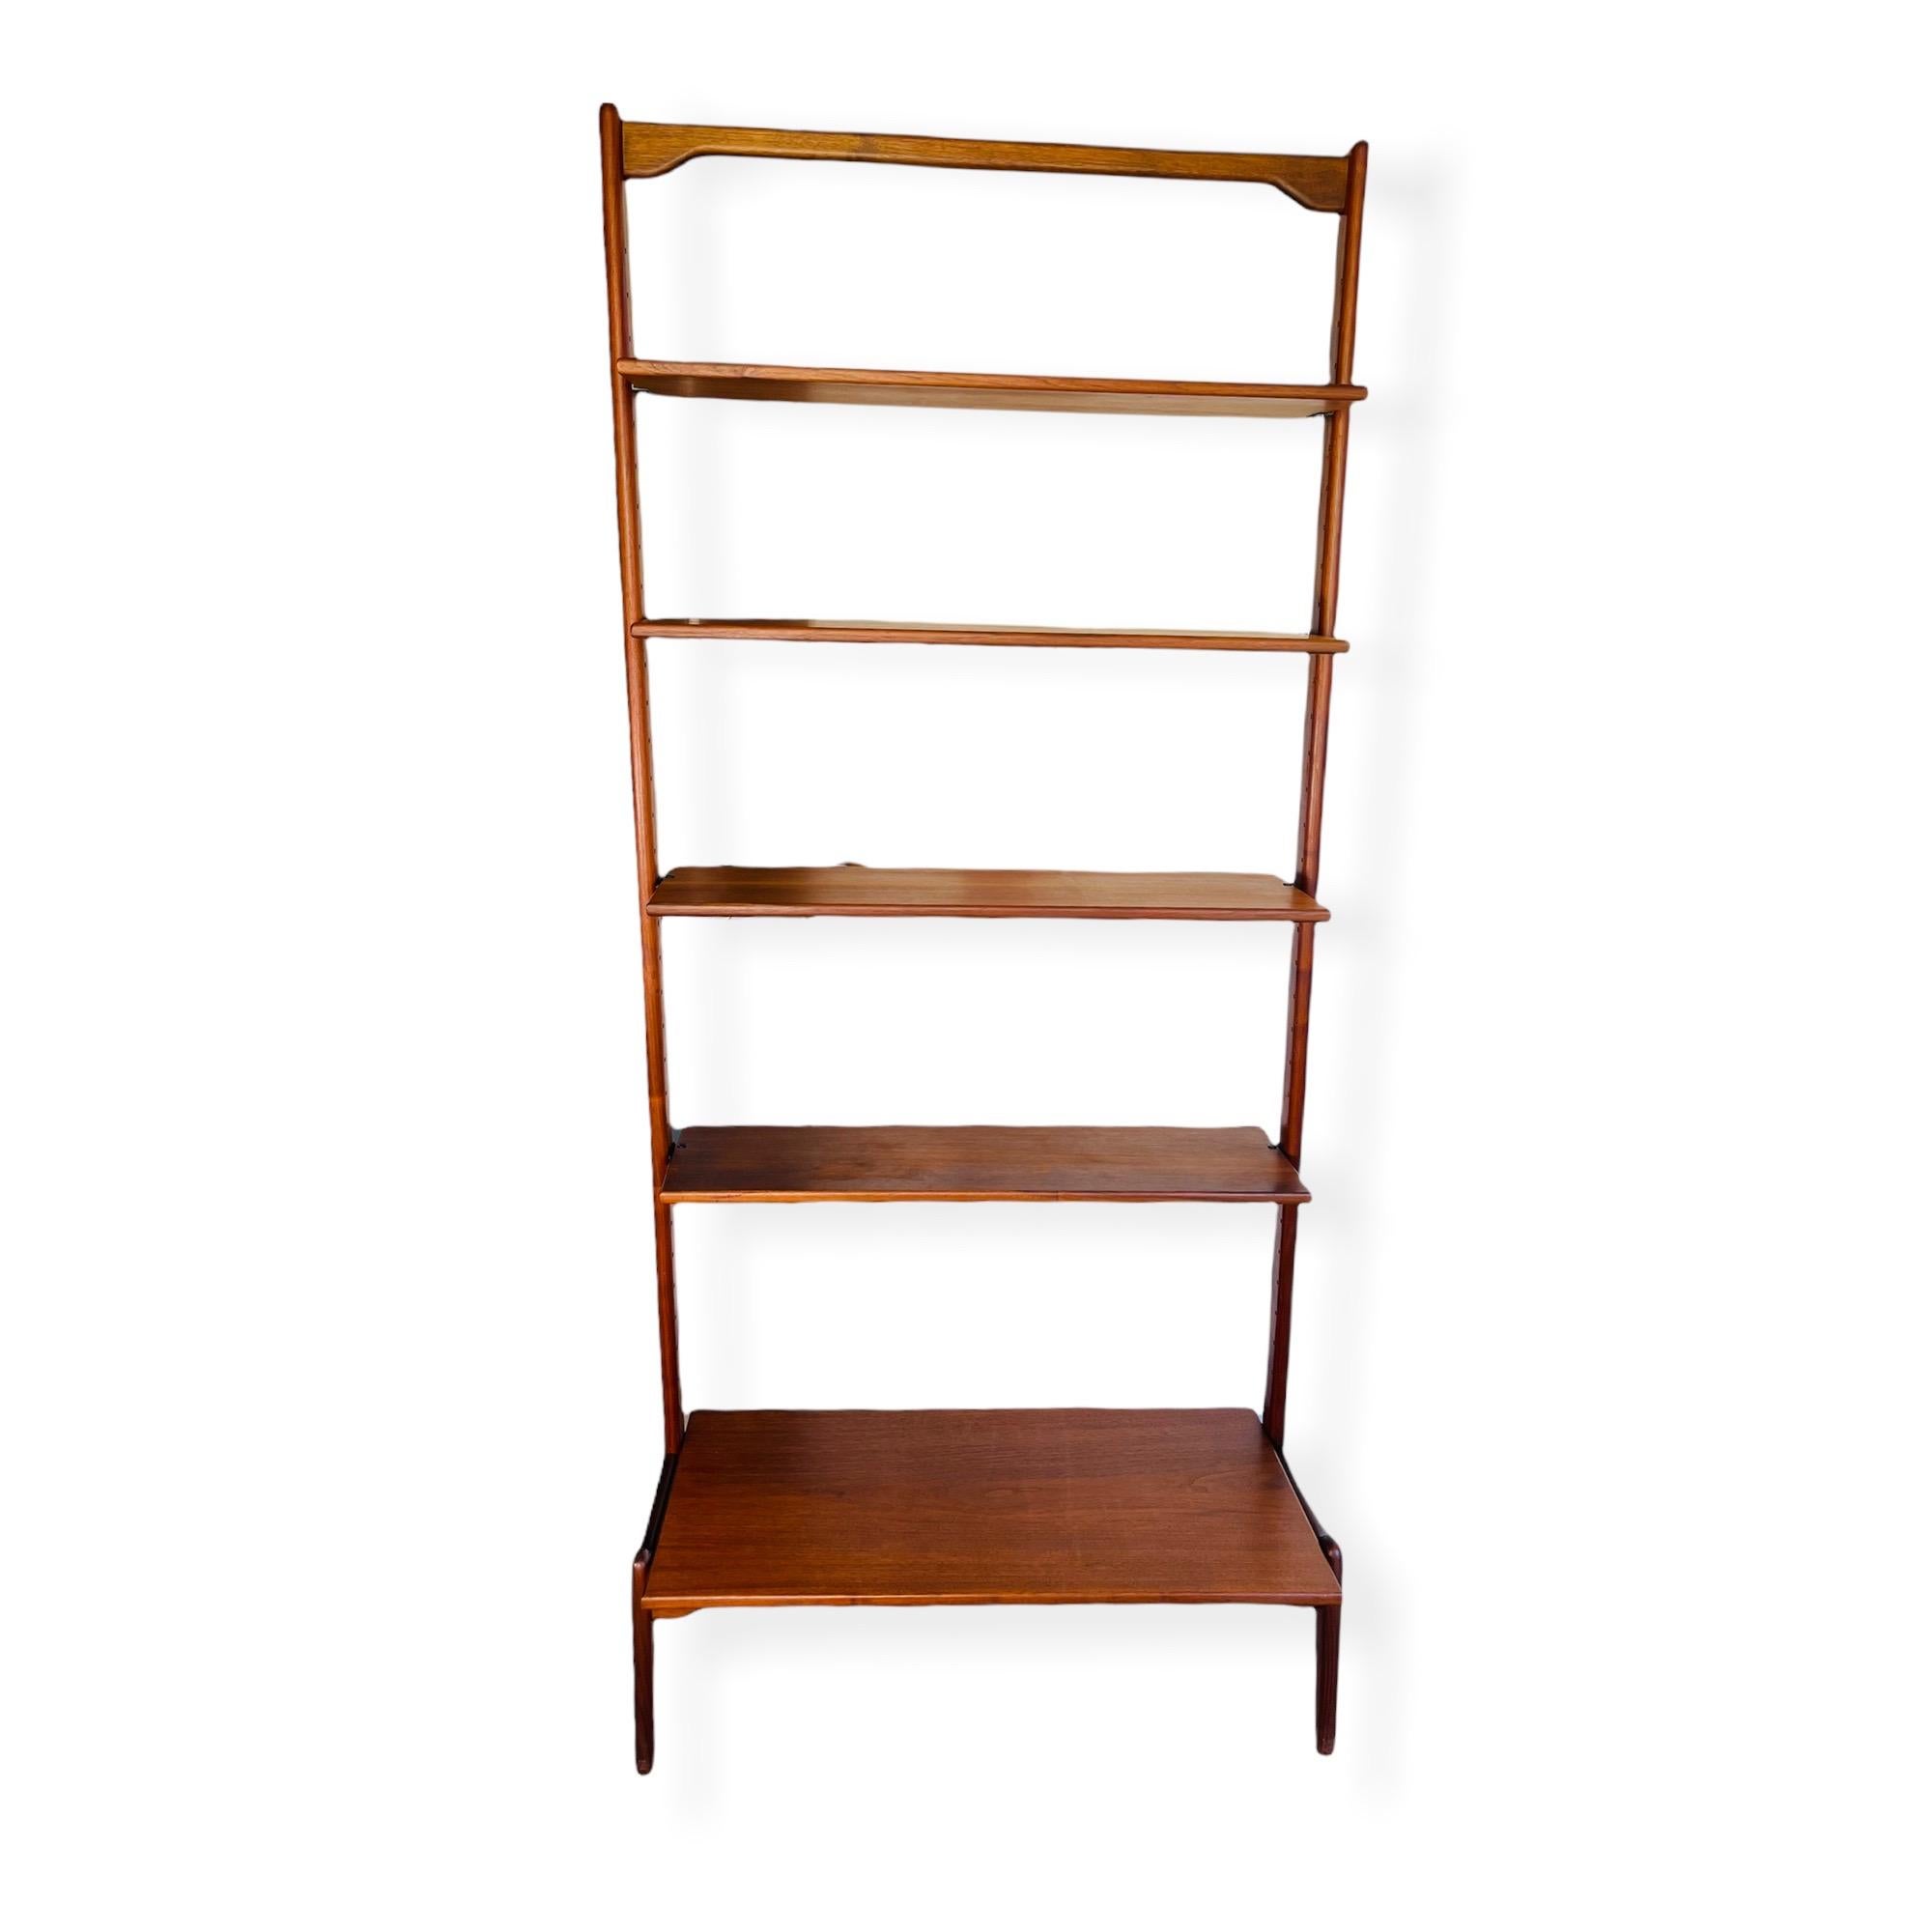 Stunning Danish modern sculptural teak bookshelf designed by Erik Buch of Denmark. This unique bookshelf features adjustable shelves and comes apart in pieces. Each shelf is marked “Made In Denmark”. This bookshelf is in good vintage condition with